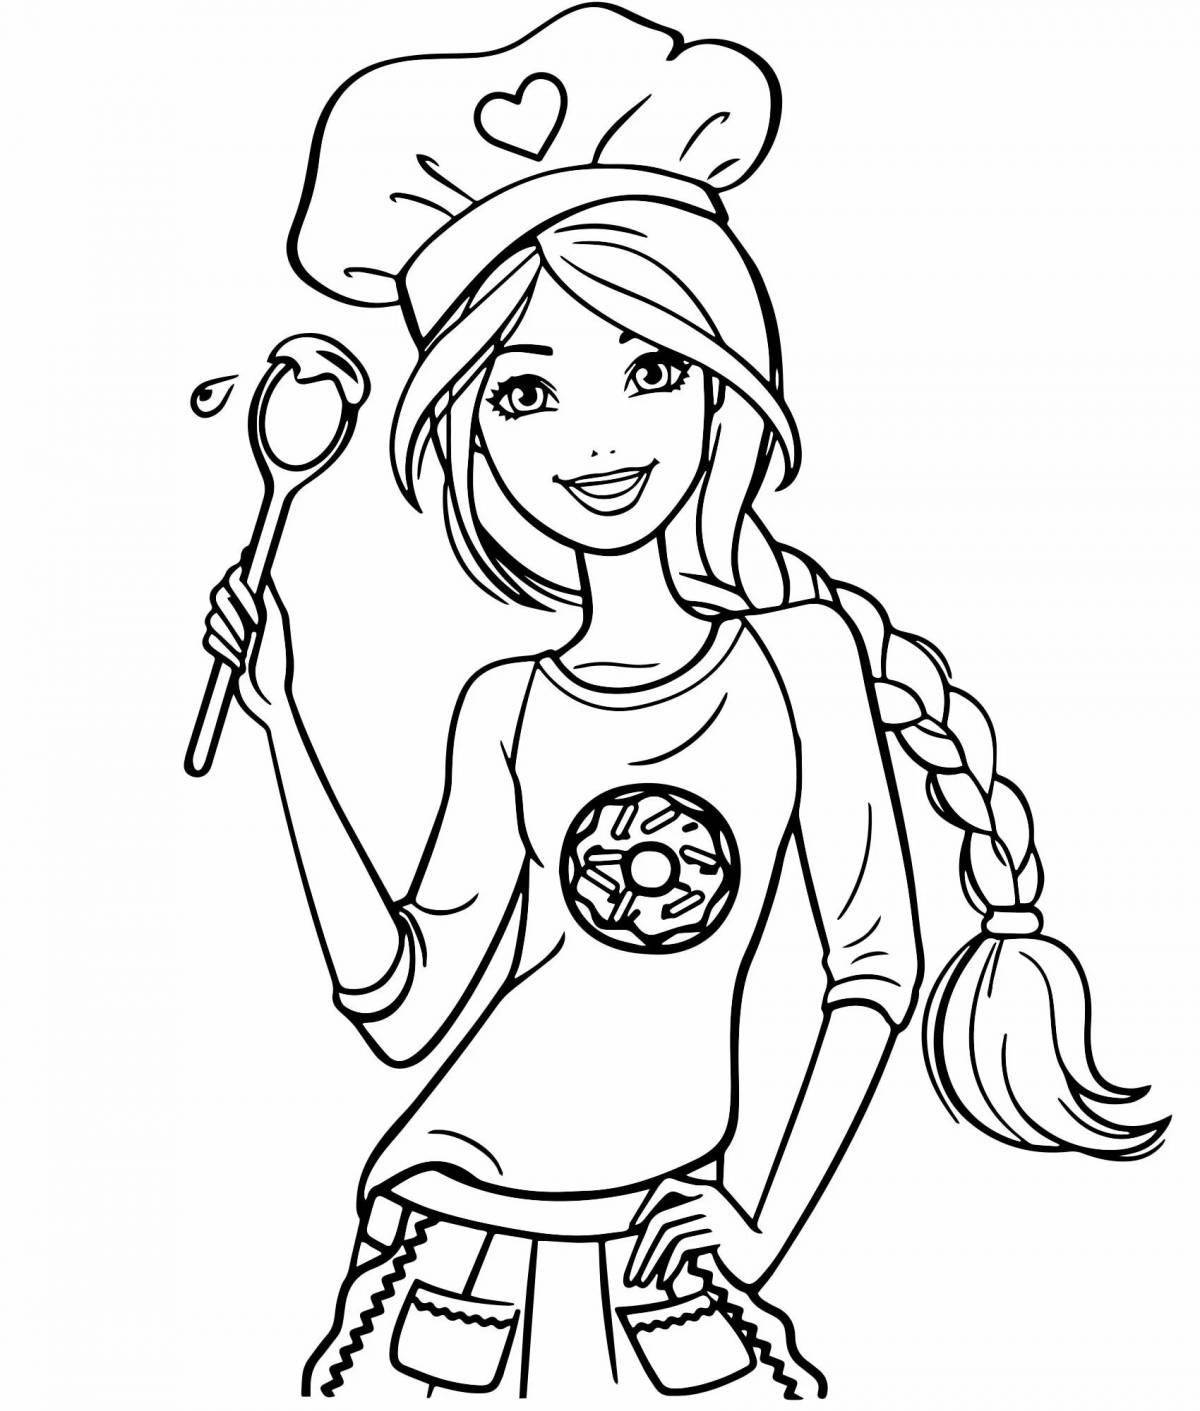 Amazing Barbie coloring book for kids 6-7 years old